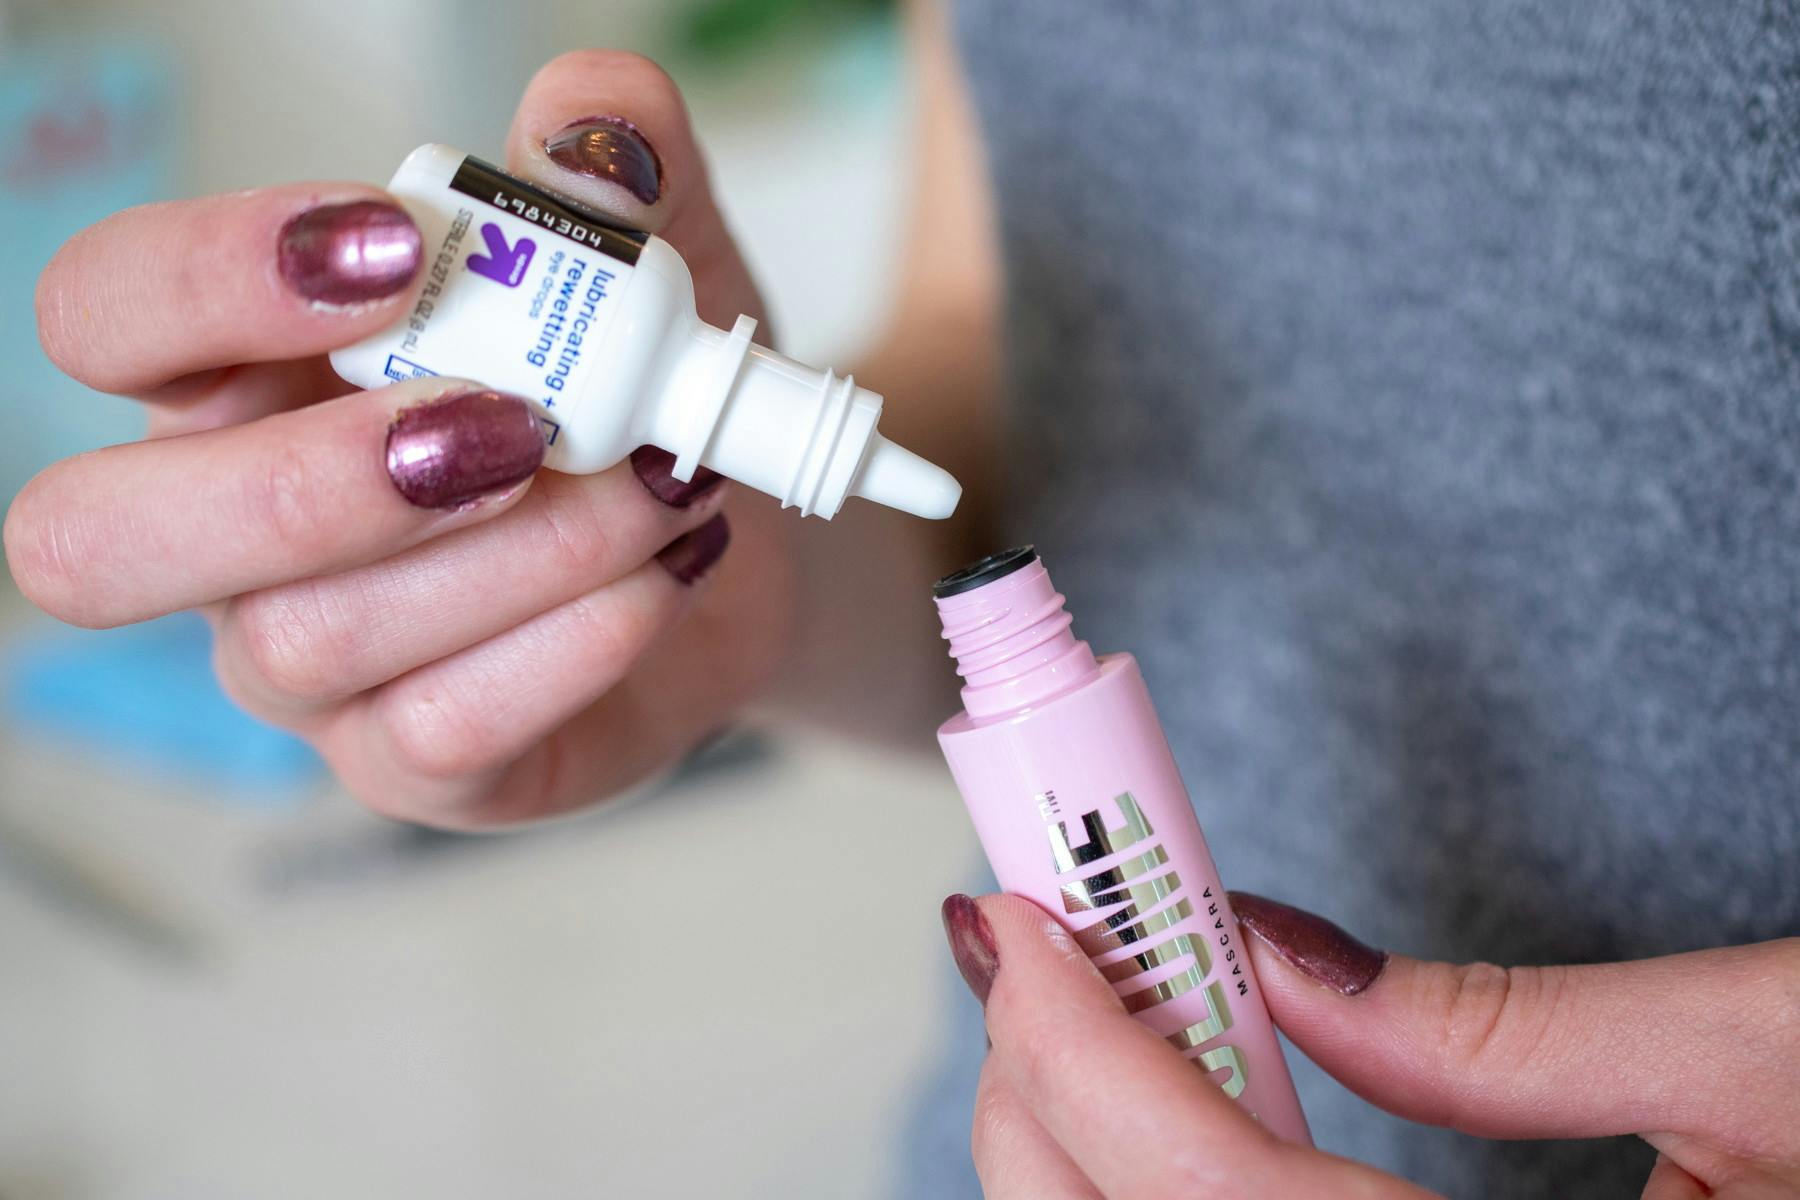 Add eyedrops to your mascara to get the clumps out.